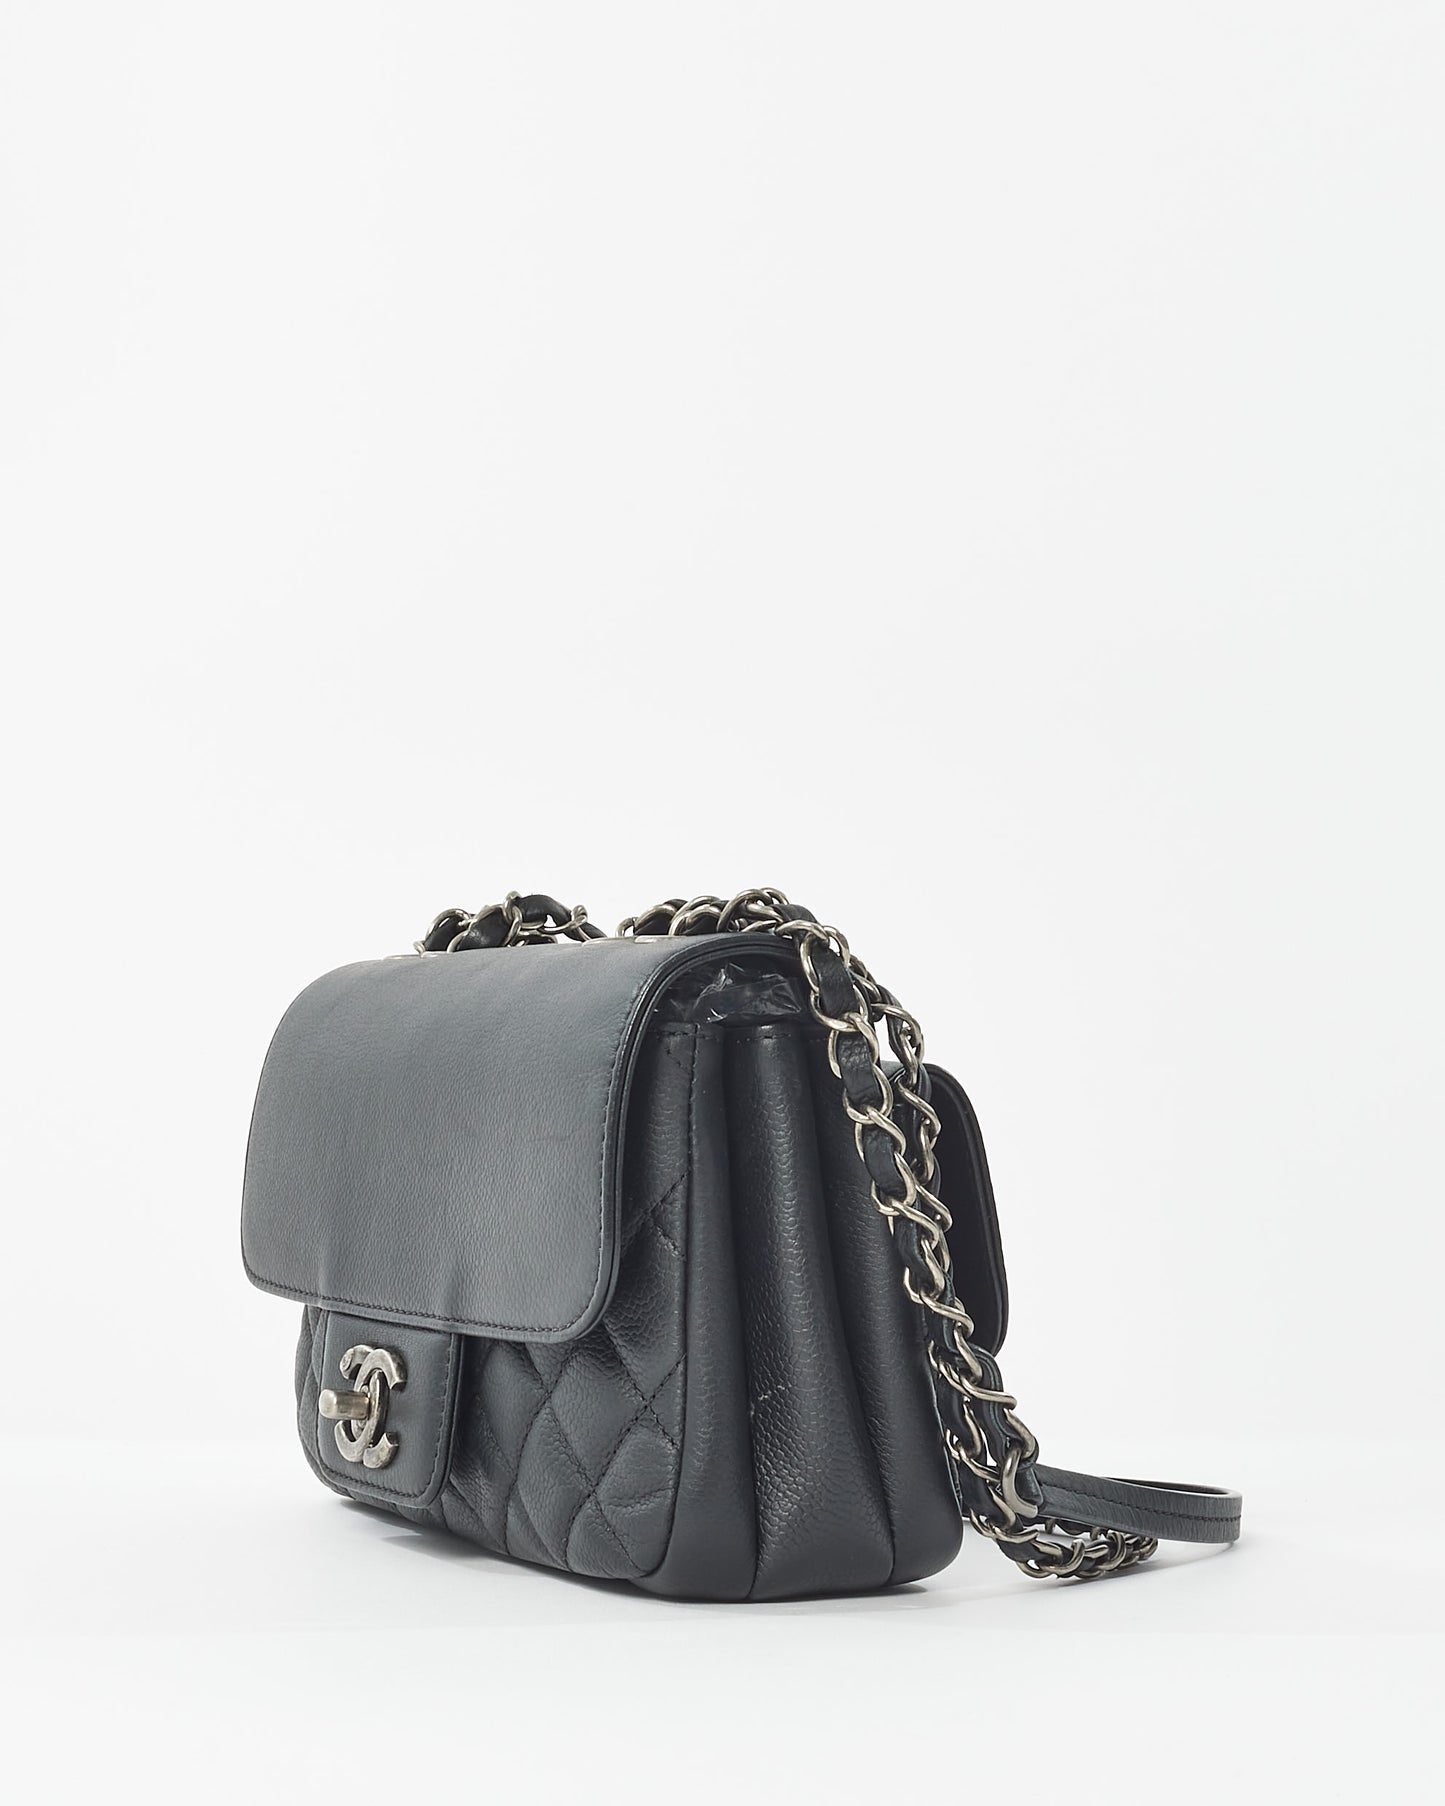 Chanel Black Leather "All About" Small Flap Bag